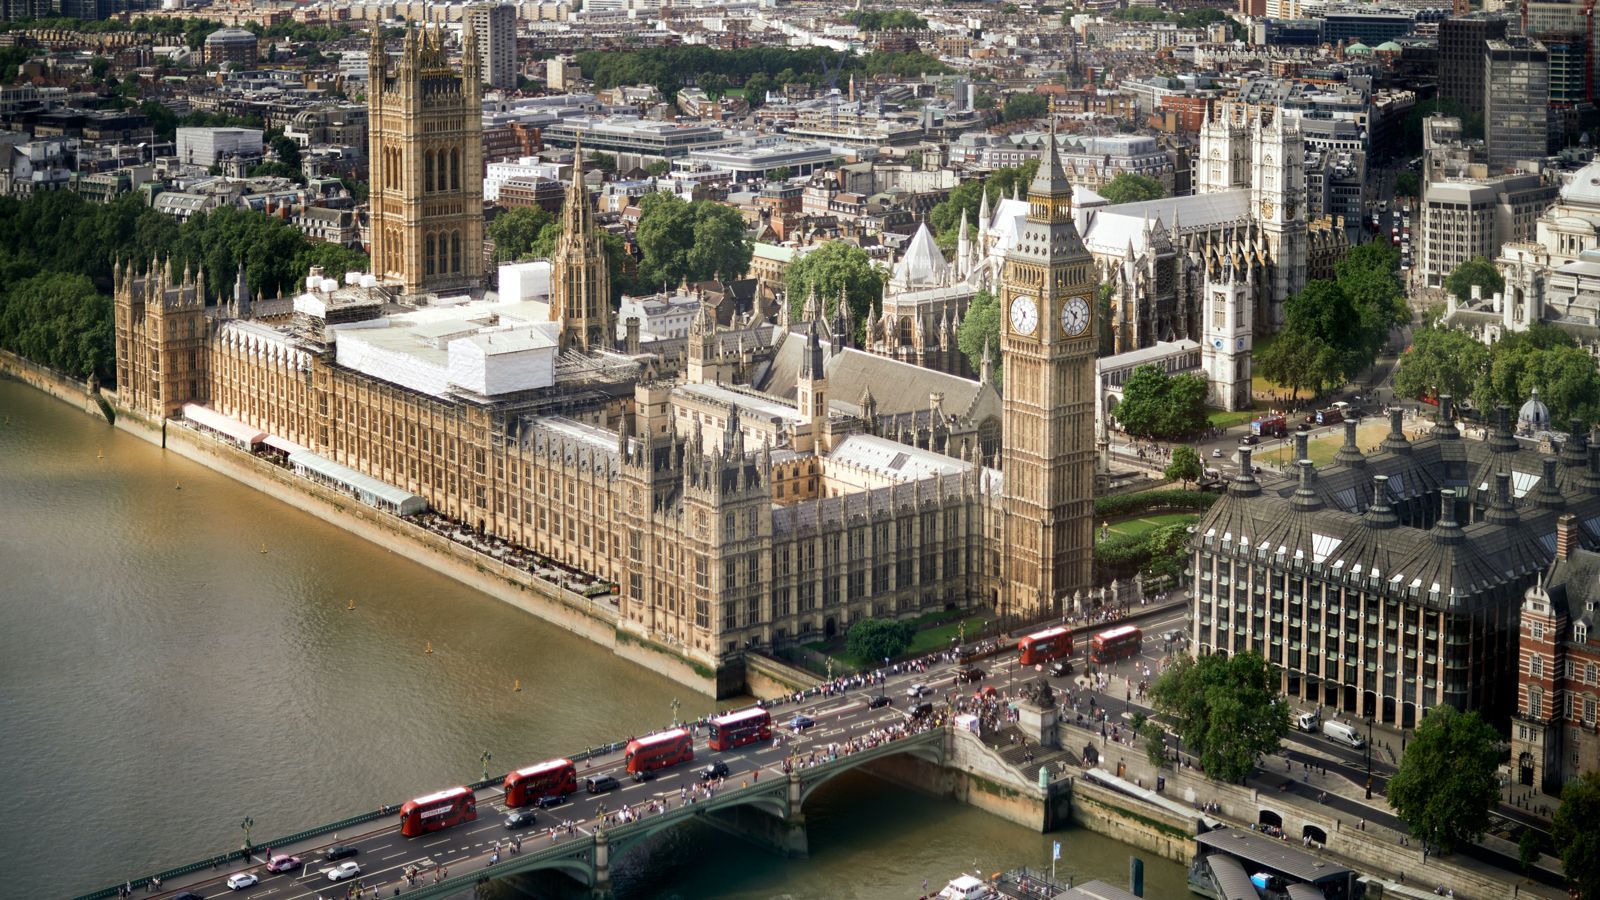 Aerial view of Parliament in London, England.